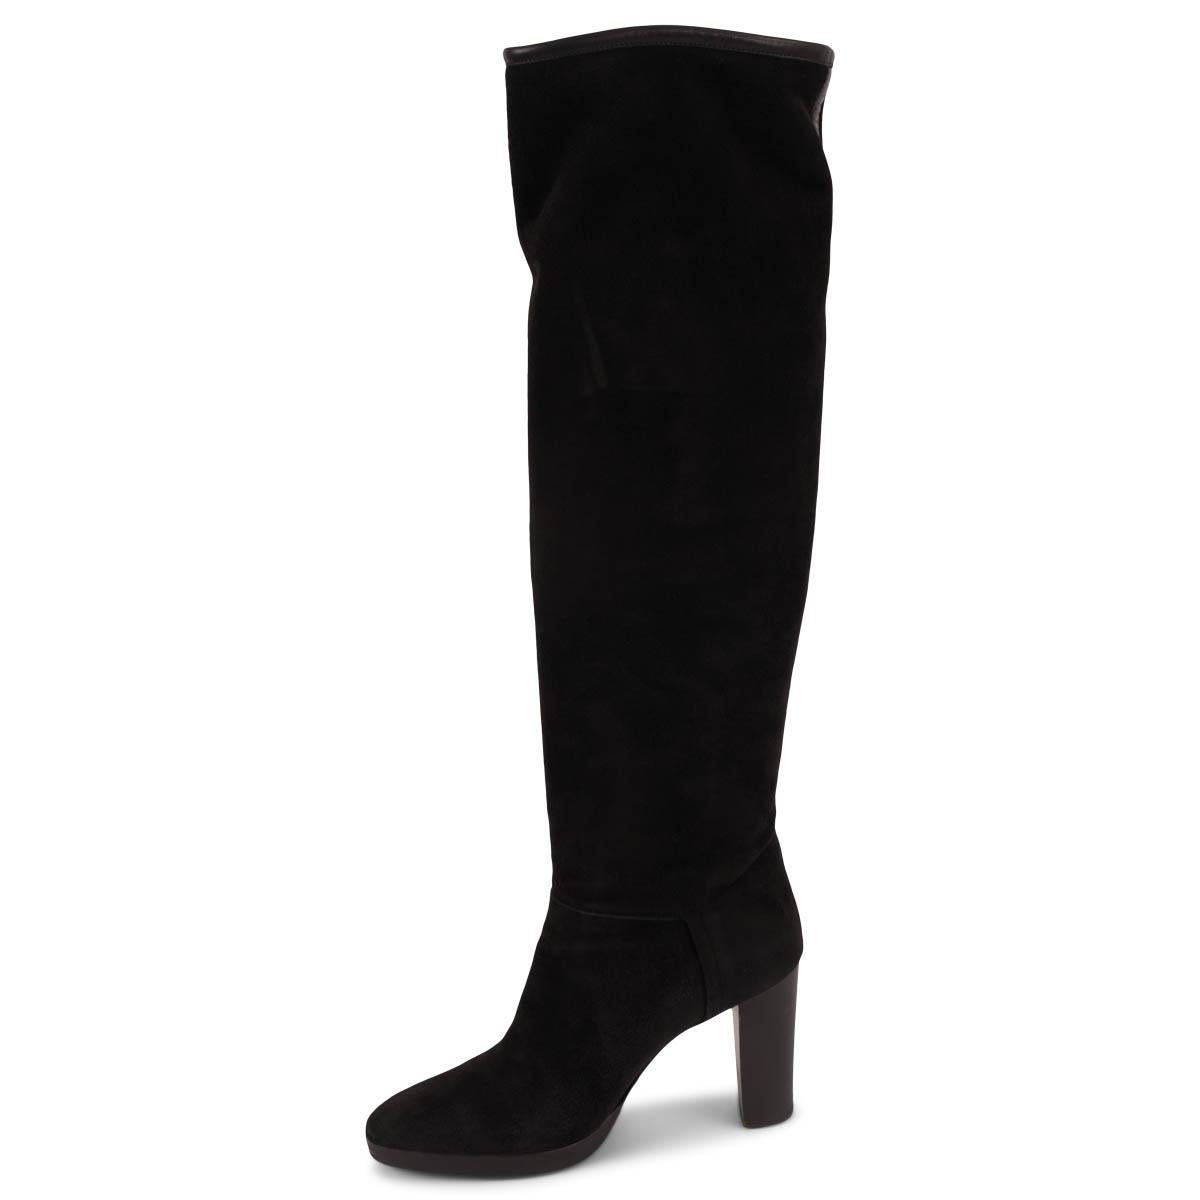 100% authentic Loro Piana Thador knee high boots in black suede with black leather trim. The design features a stacked heel and platform. Lined in black cashmere. Have been worn and shows soft wear to the suede, the heels and the sole. Overall in